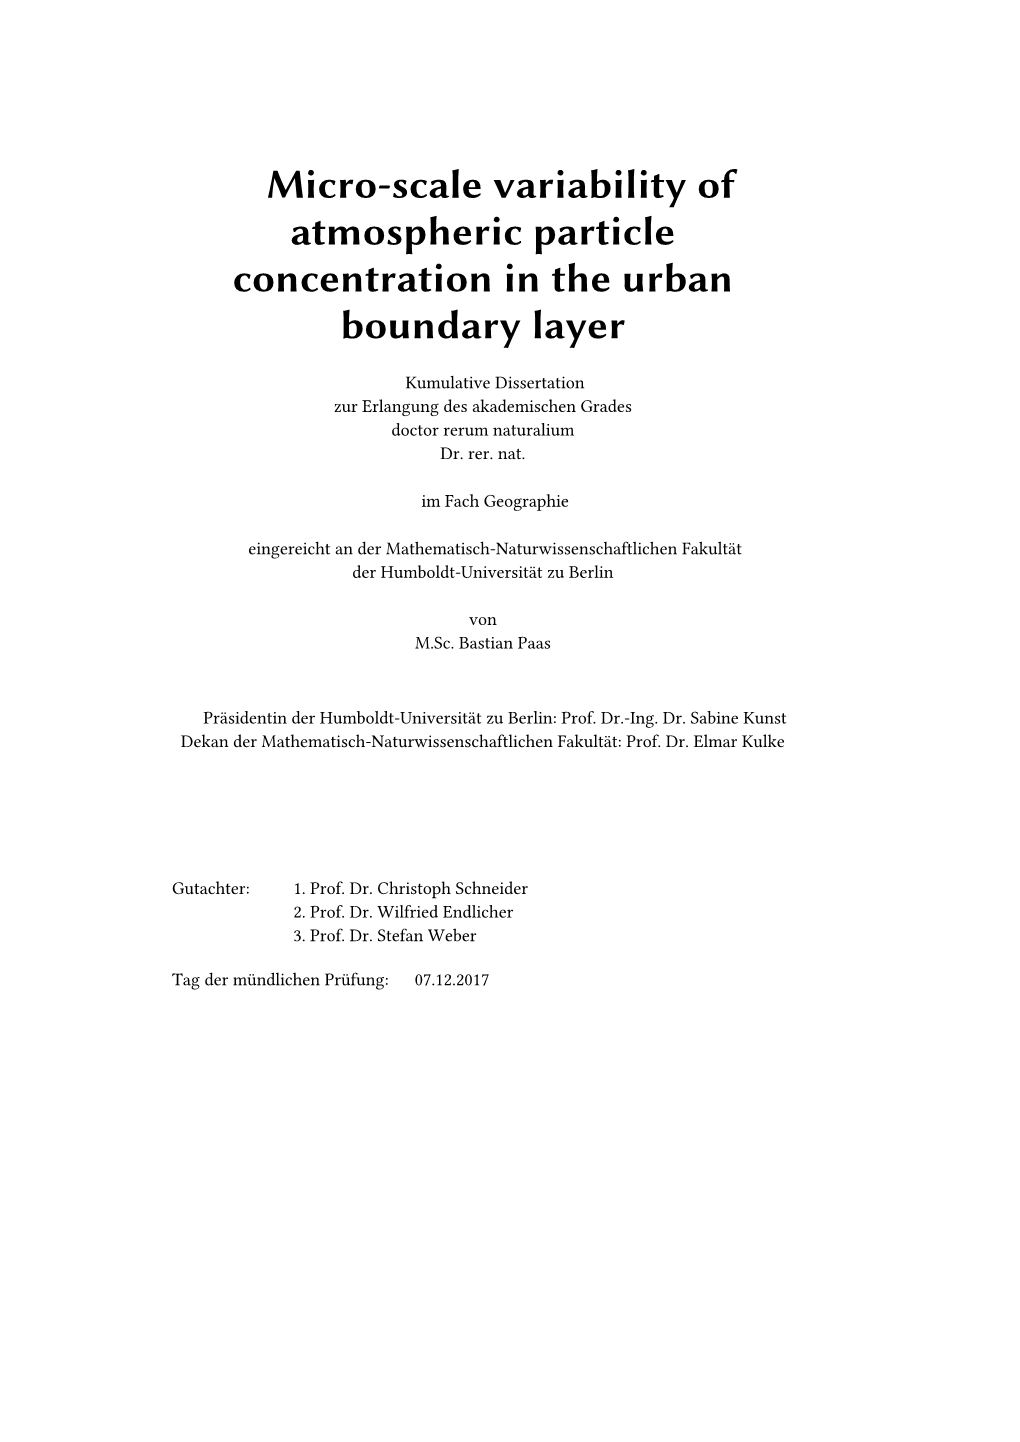 Micro-Scale Variability of Atmospheric Particle Concentration in the Urban Boundary Layer